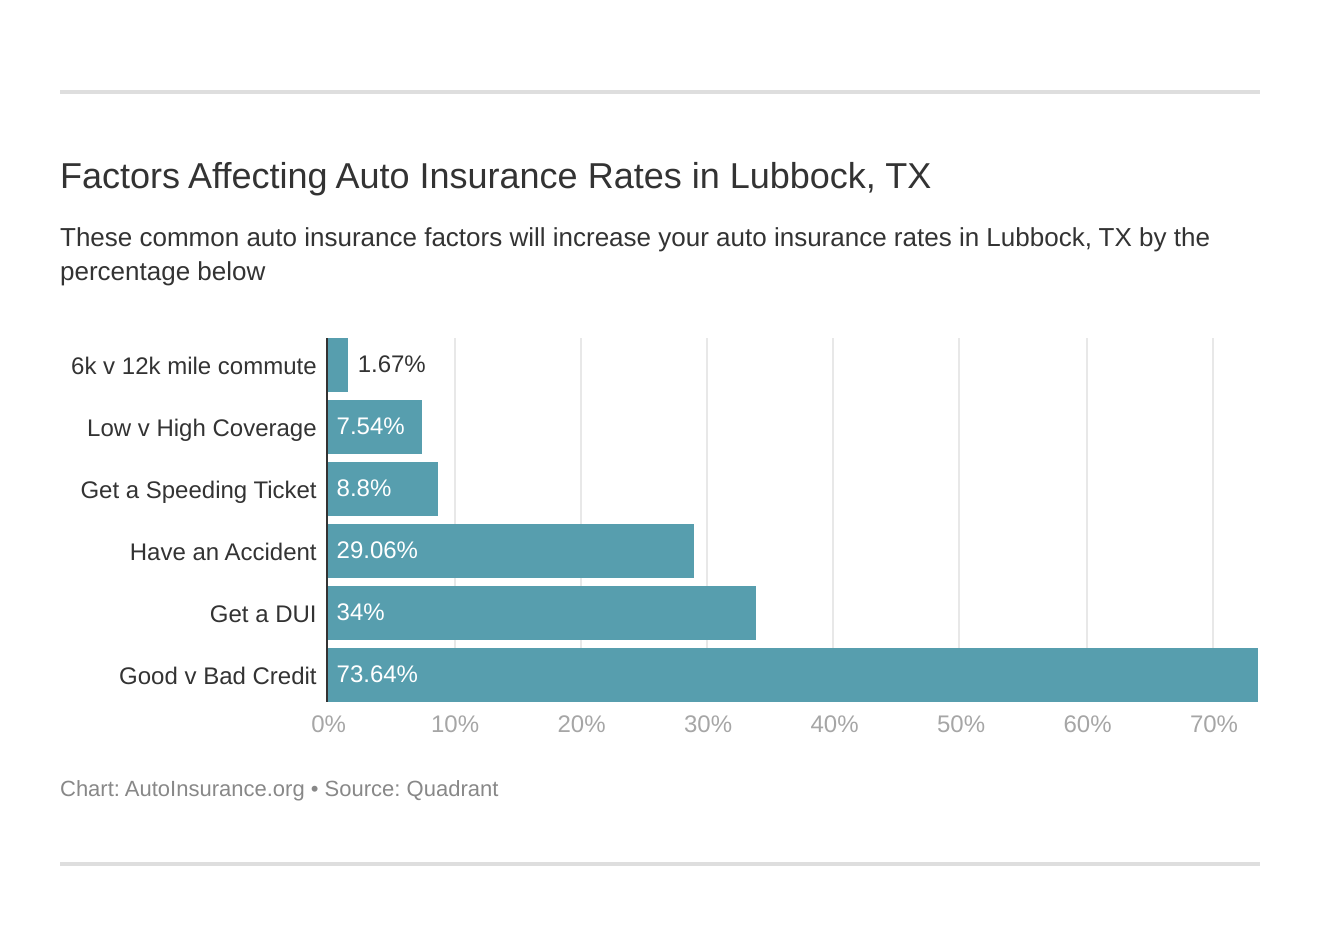 Factors Affecting Auto Insurance Rates in Lubbock, TX